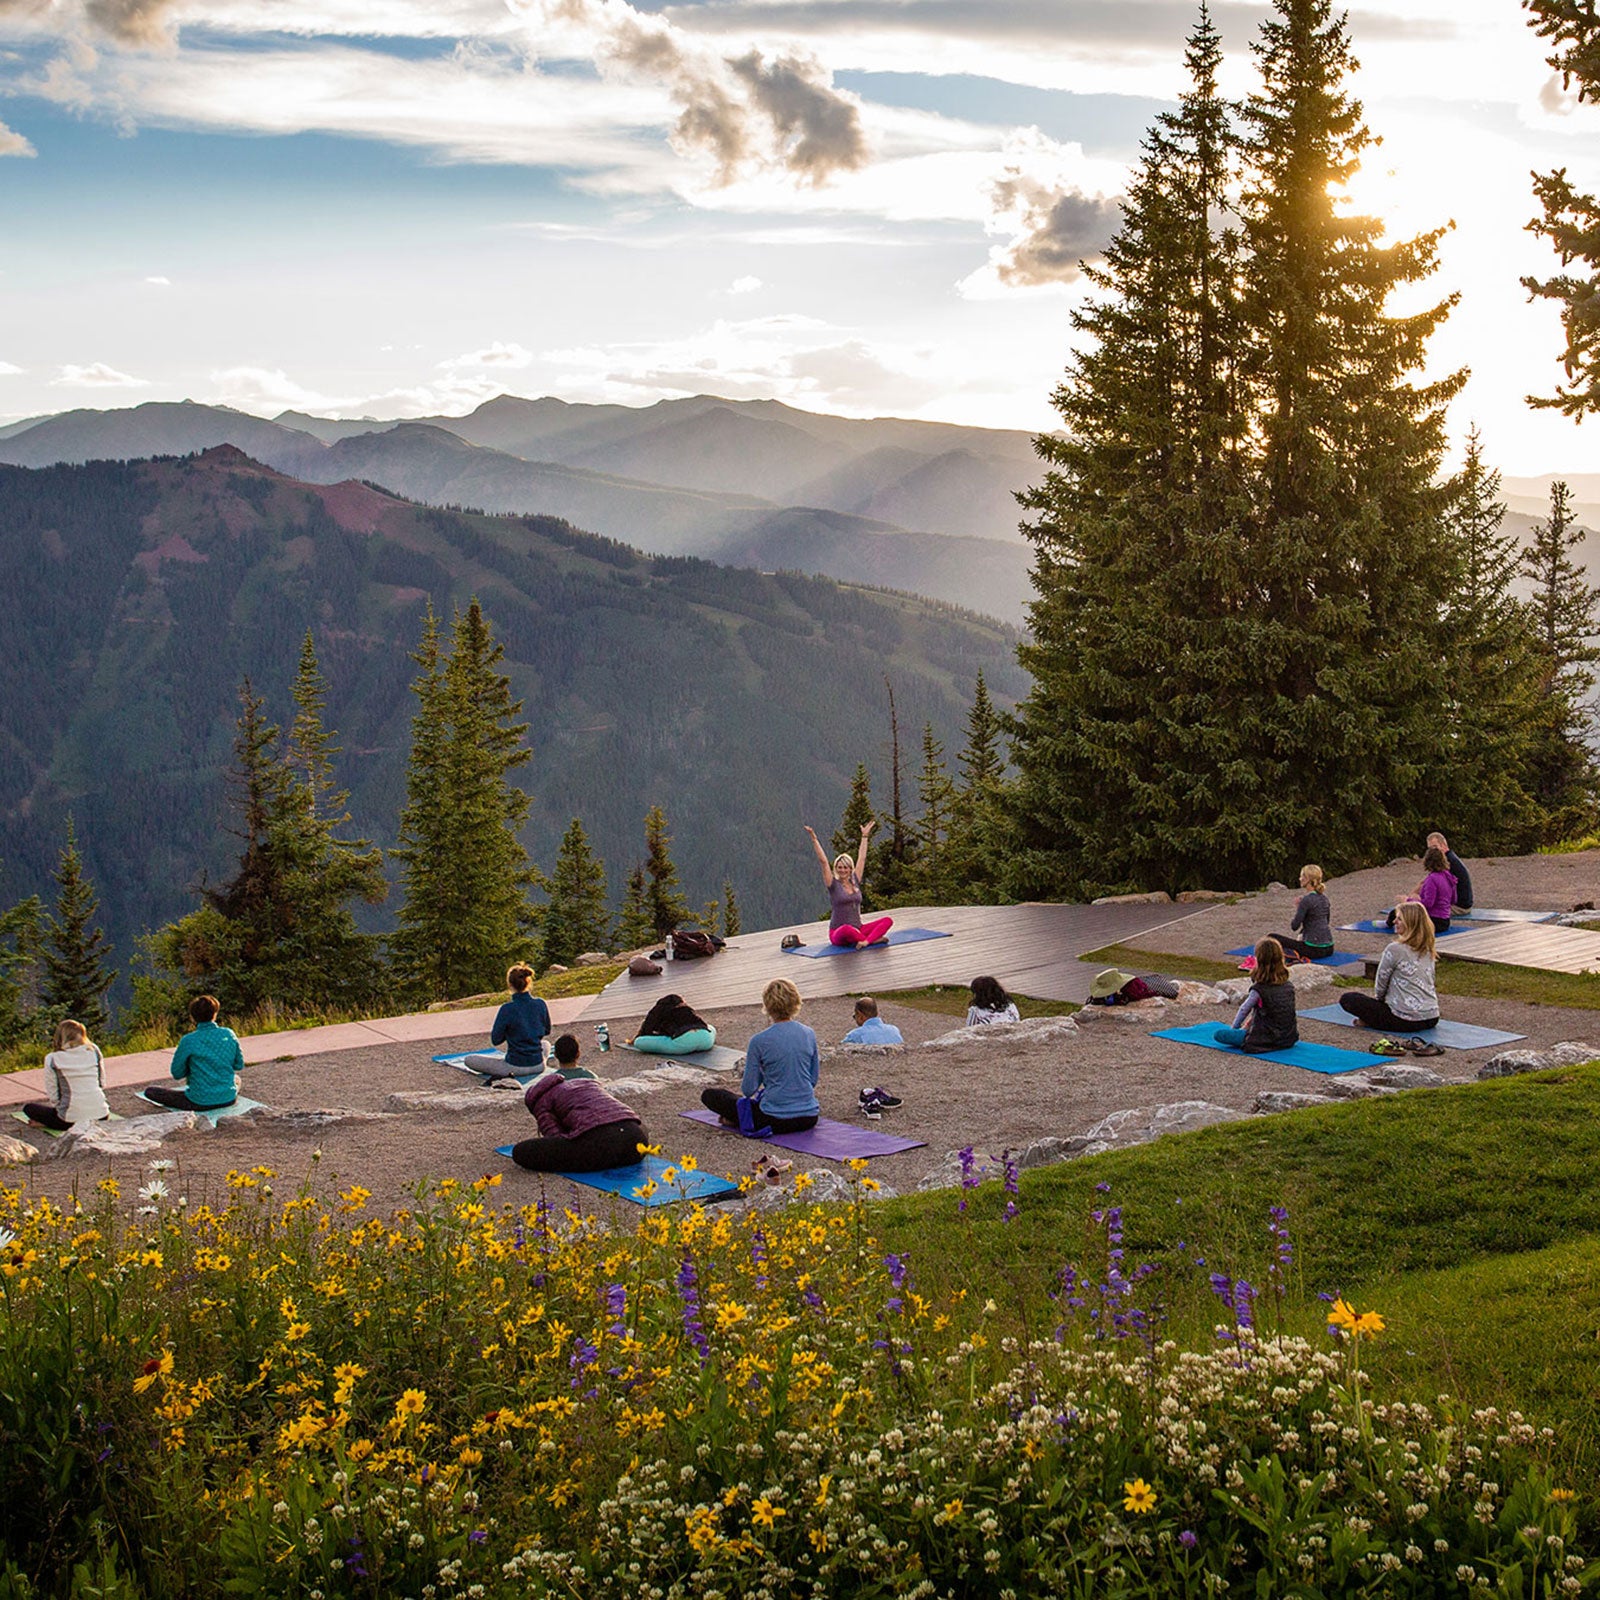 The World's Dreamiest Spots for Outdoor Yoga